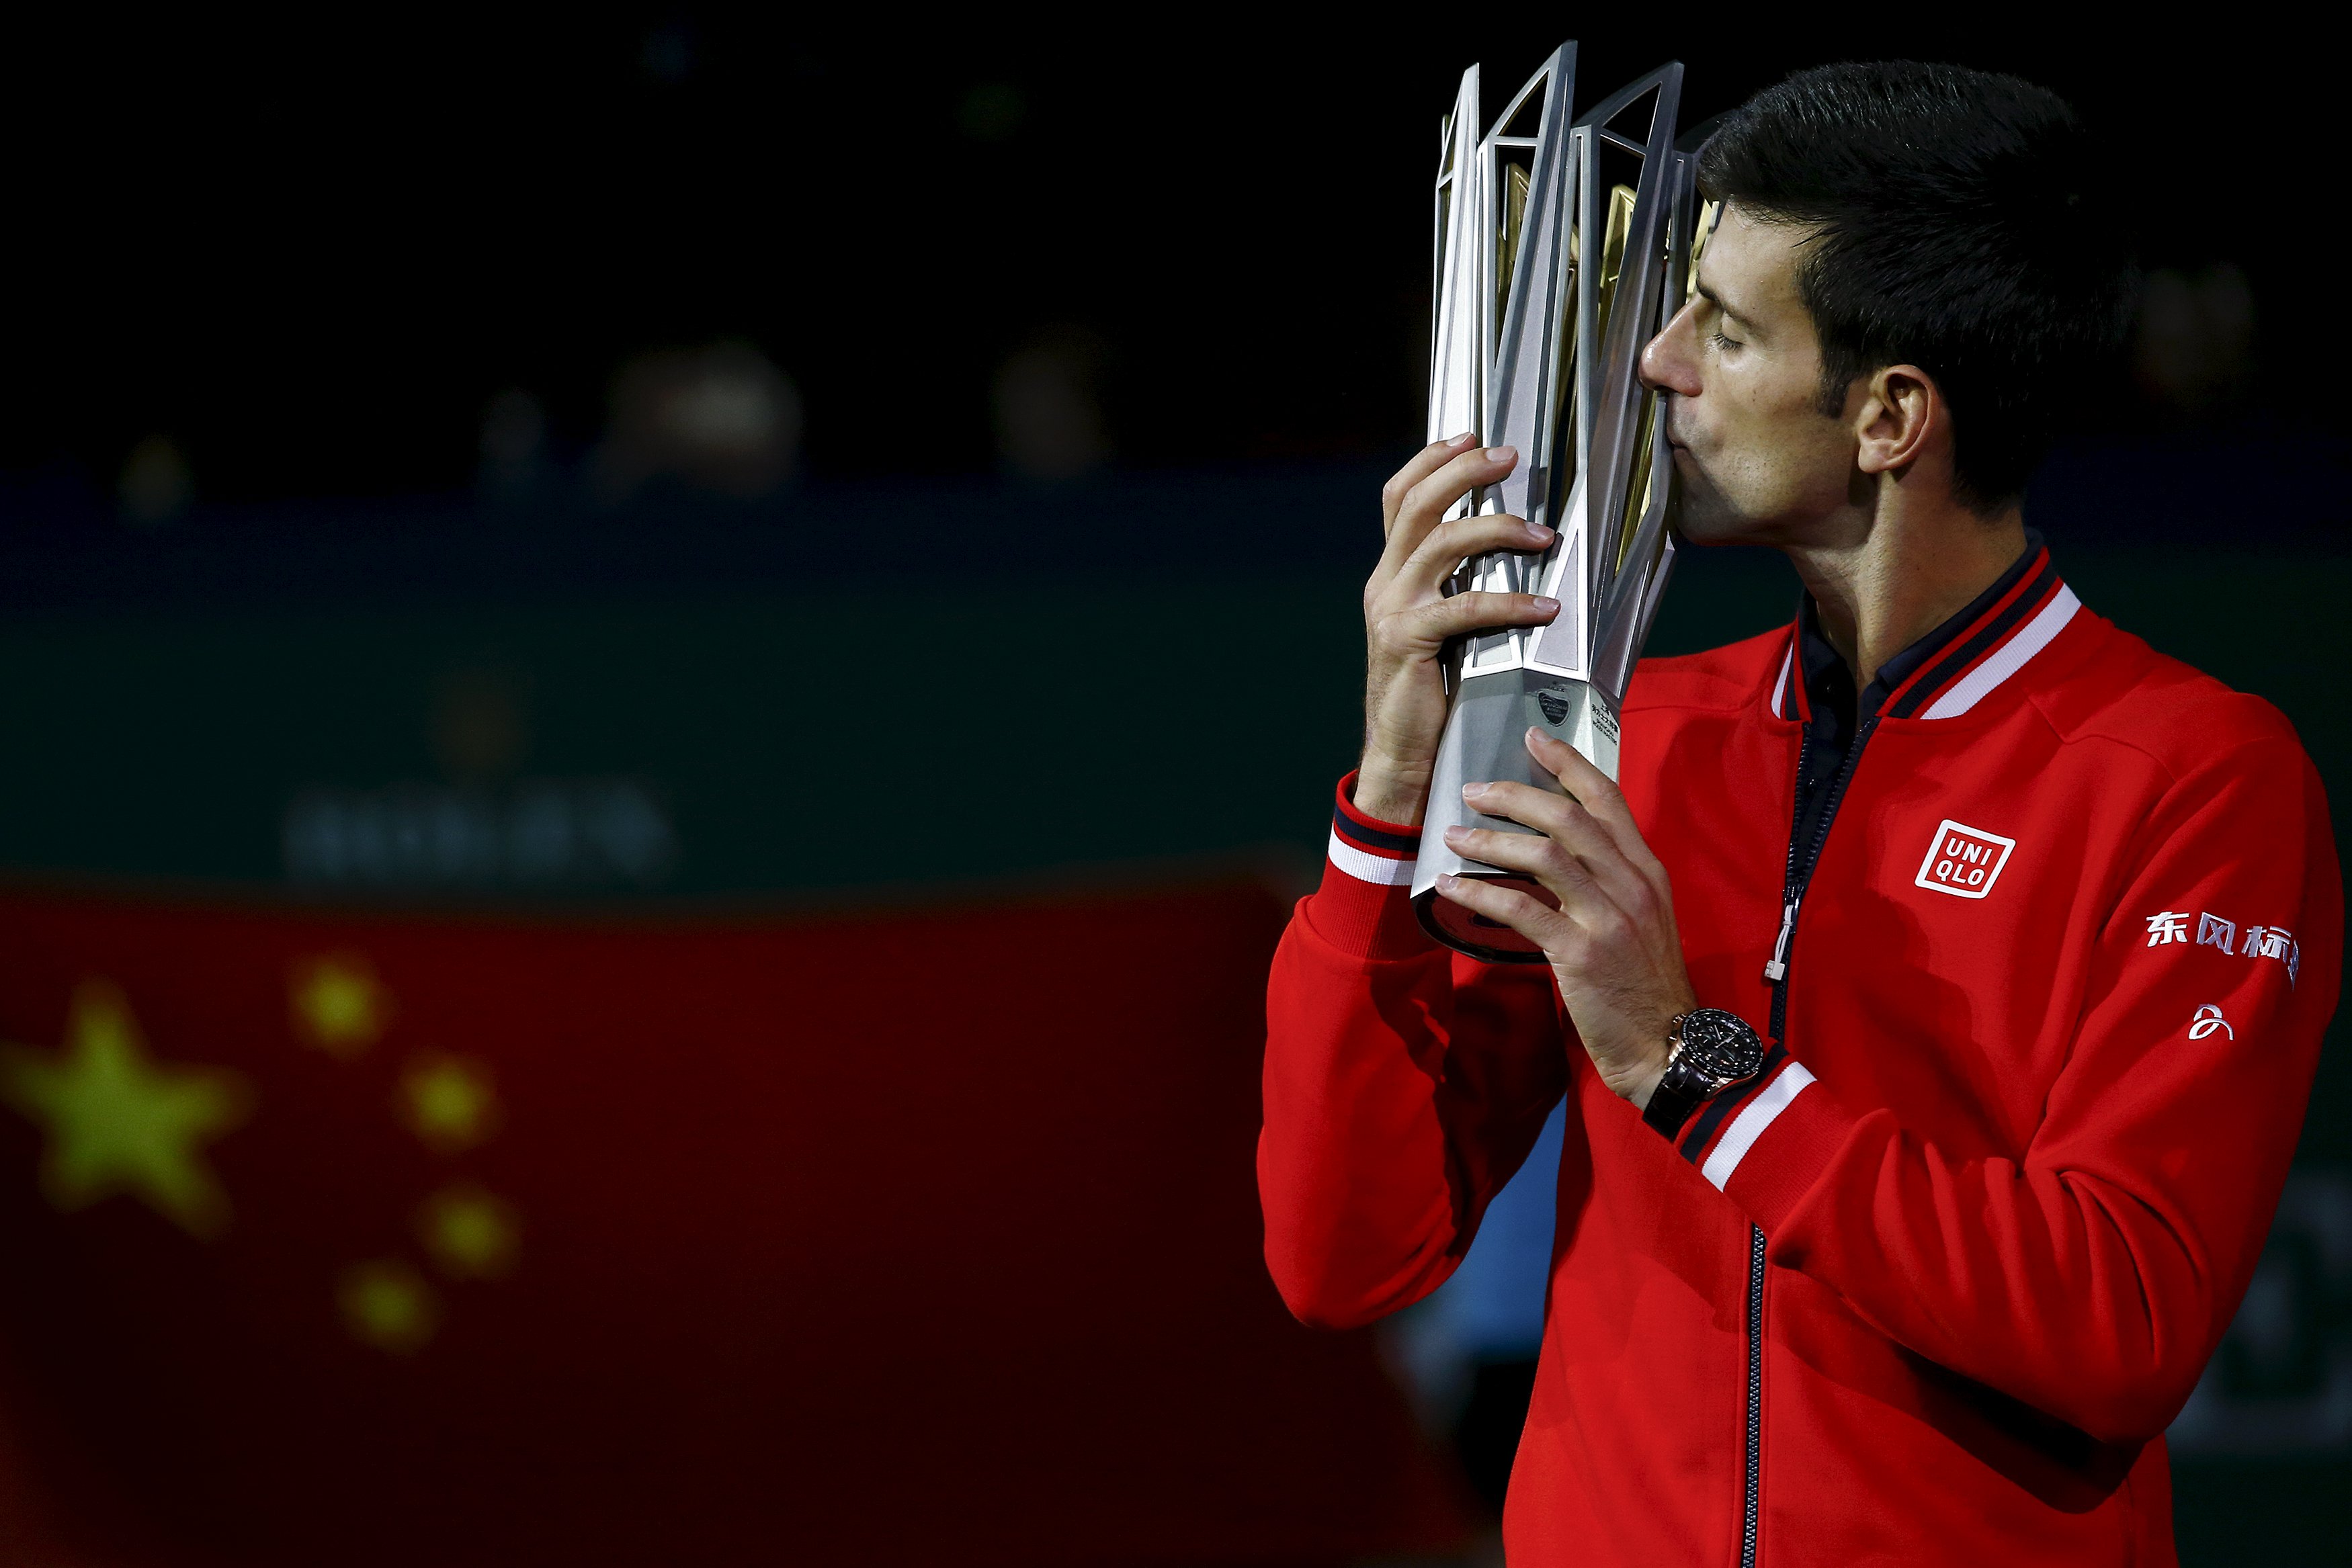 Novak Djokovic of Serbia kisses the trophy after winning the men's singles final match against Jo-Wilfried Tsonga of France at the Shanghai Masters tennis tournament in Shanghai, China, October 18, 2015.  REUTERS/Damir Sagolj